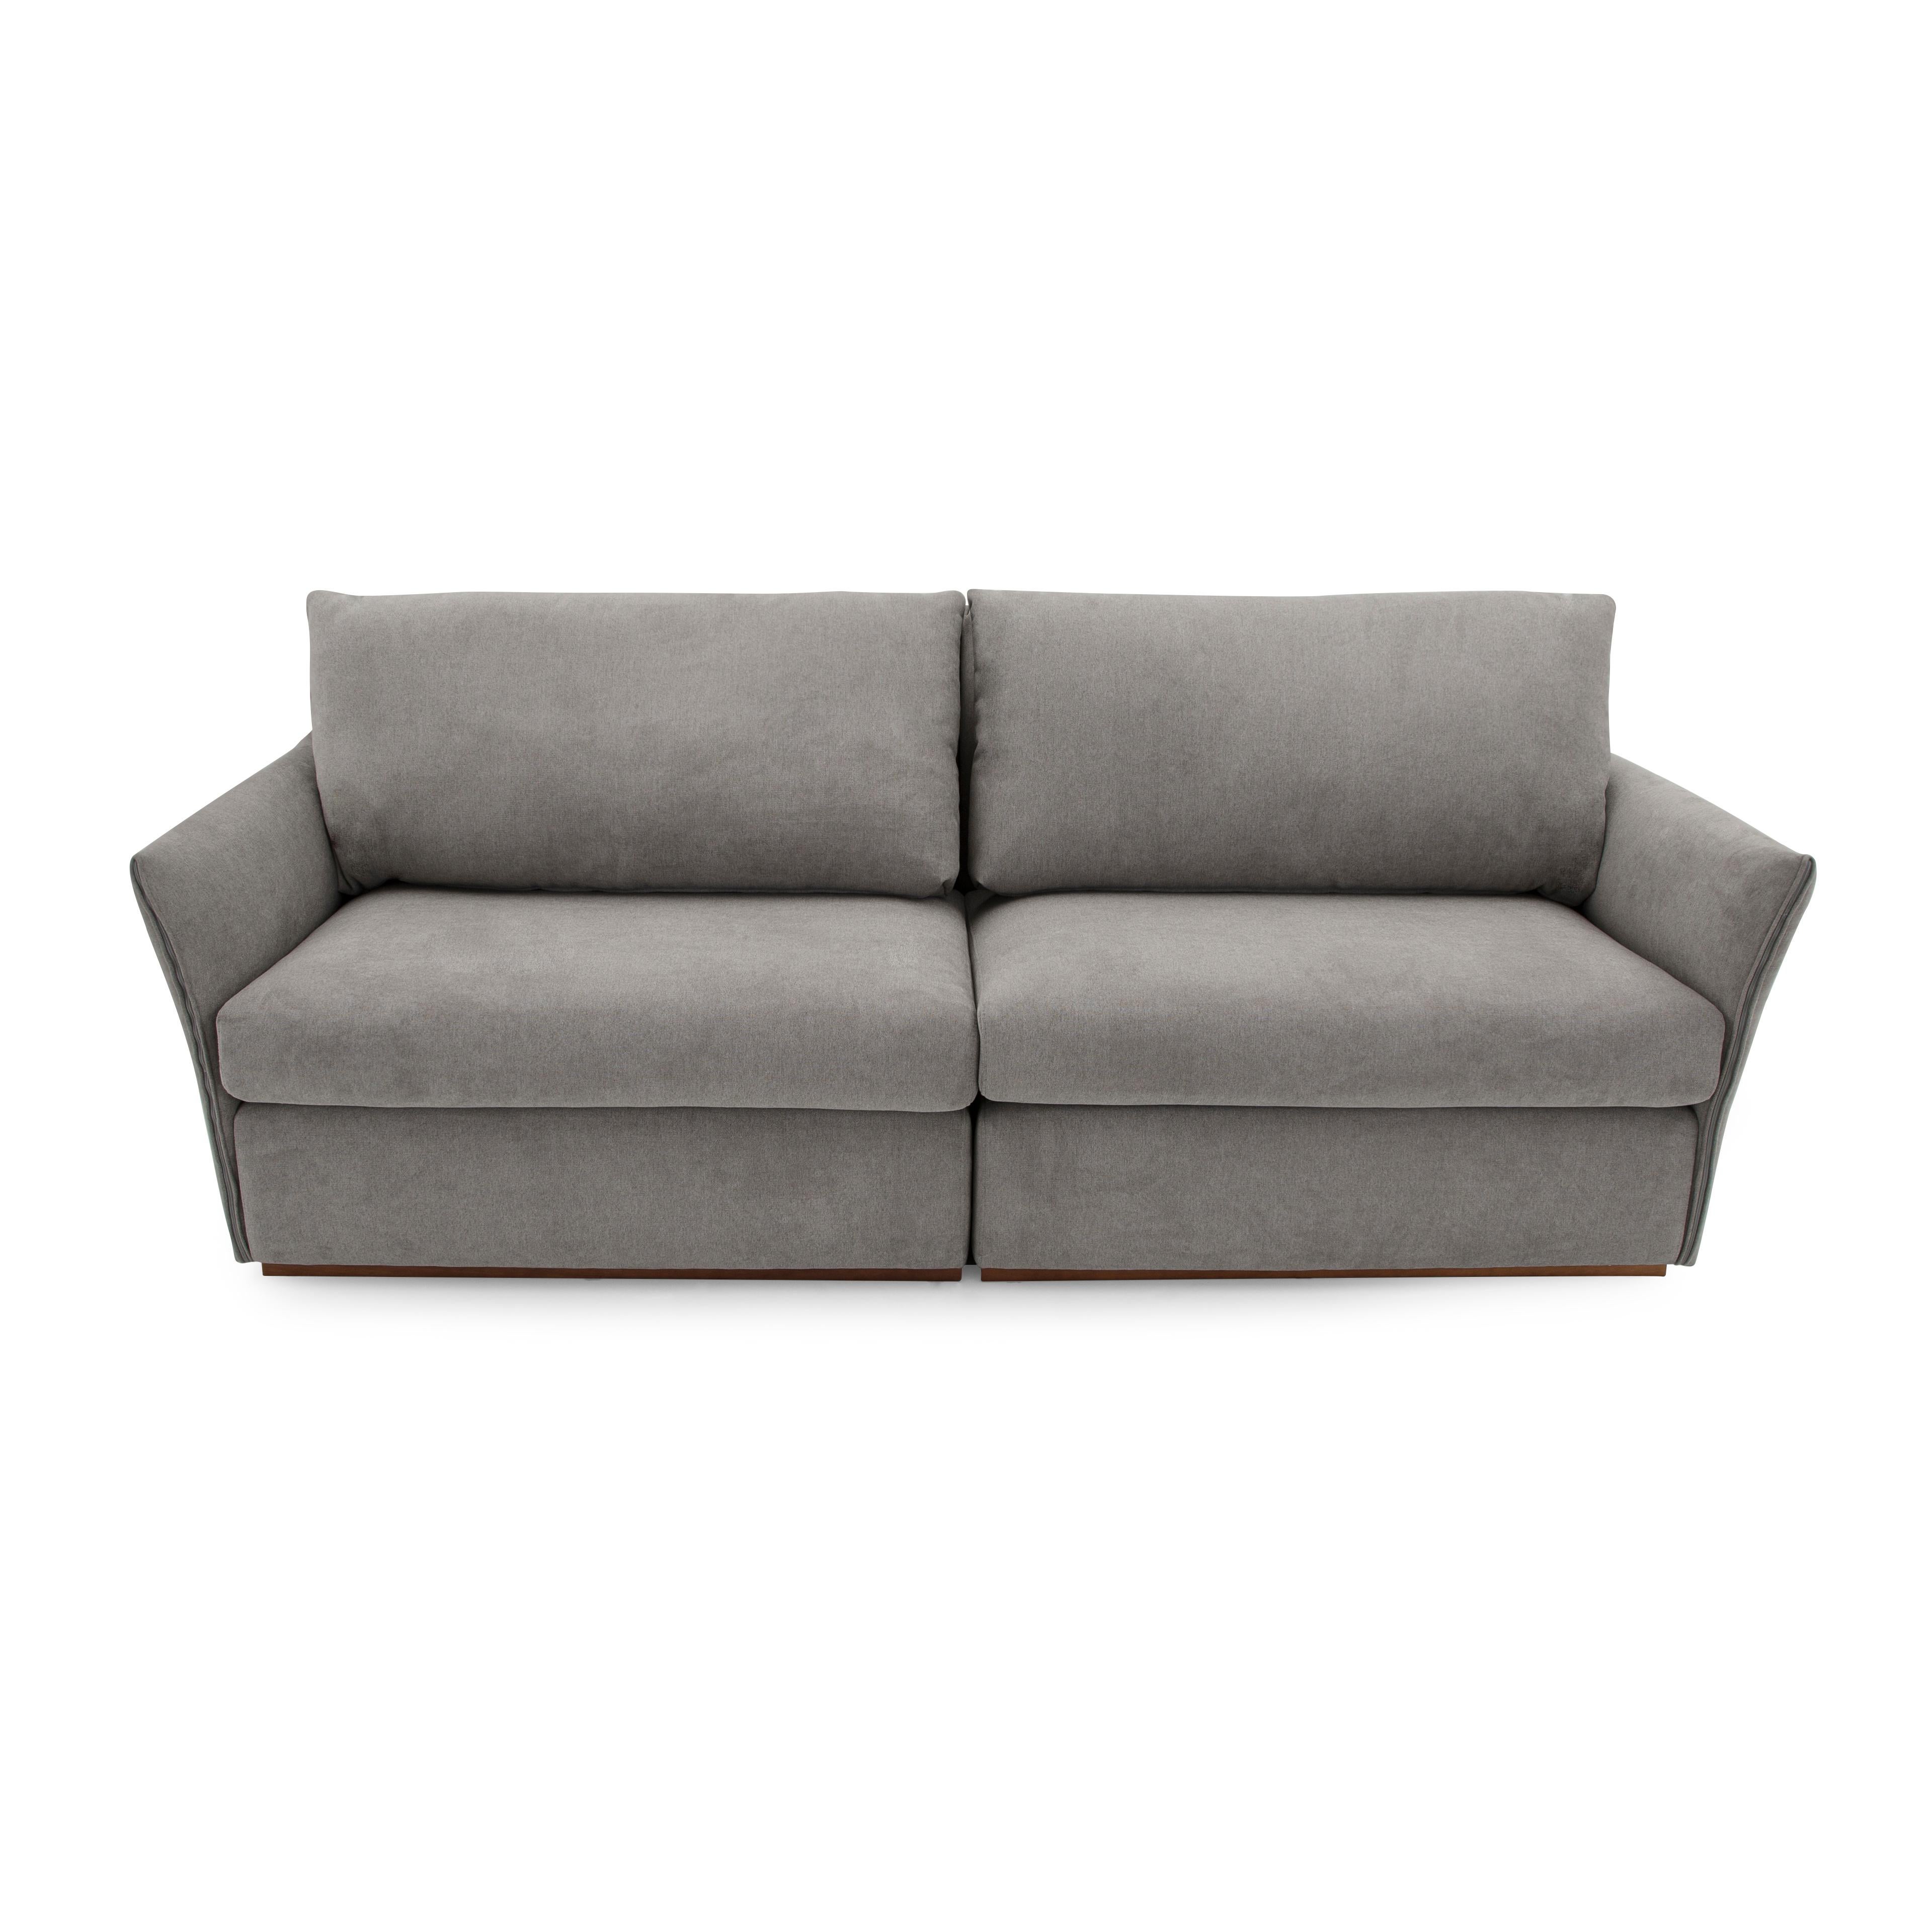 The Thin sofa with bowed arms, upholstered in a gray fabric is here for you and your family. As relaxing as it looks, the actual seat is even better. Complete with padded arms, this sofa is the perfect complement to a room used by the entire family